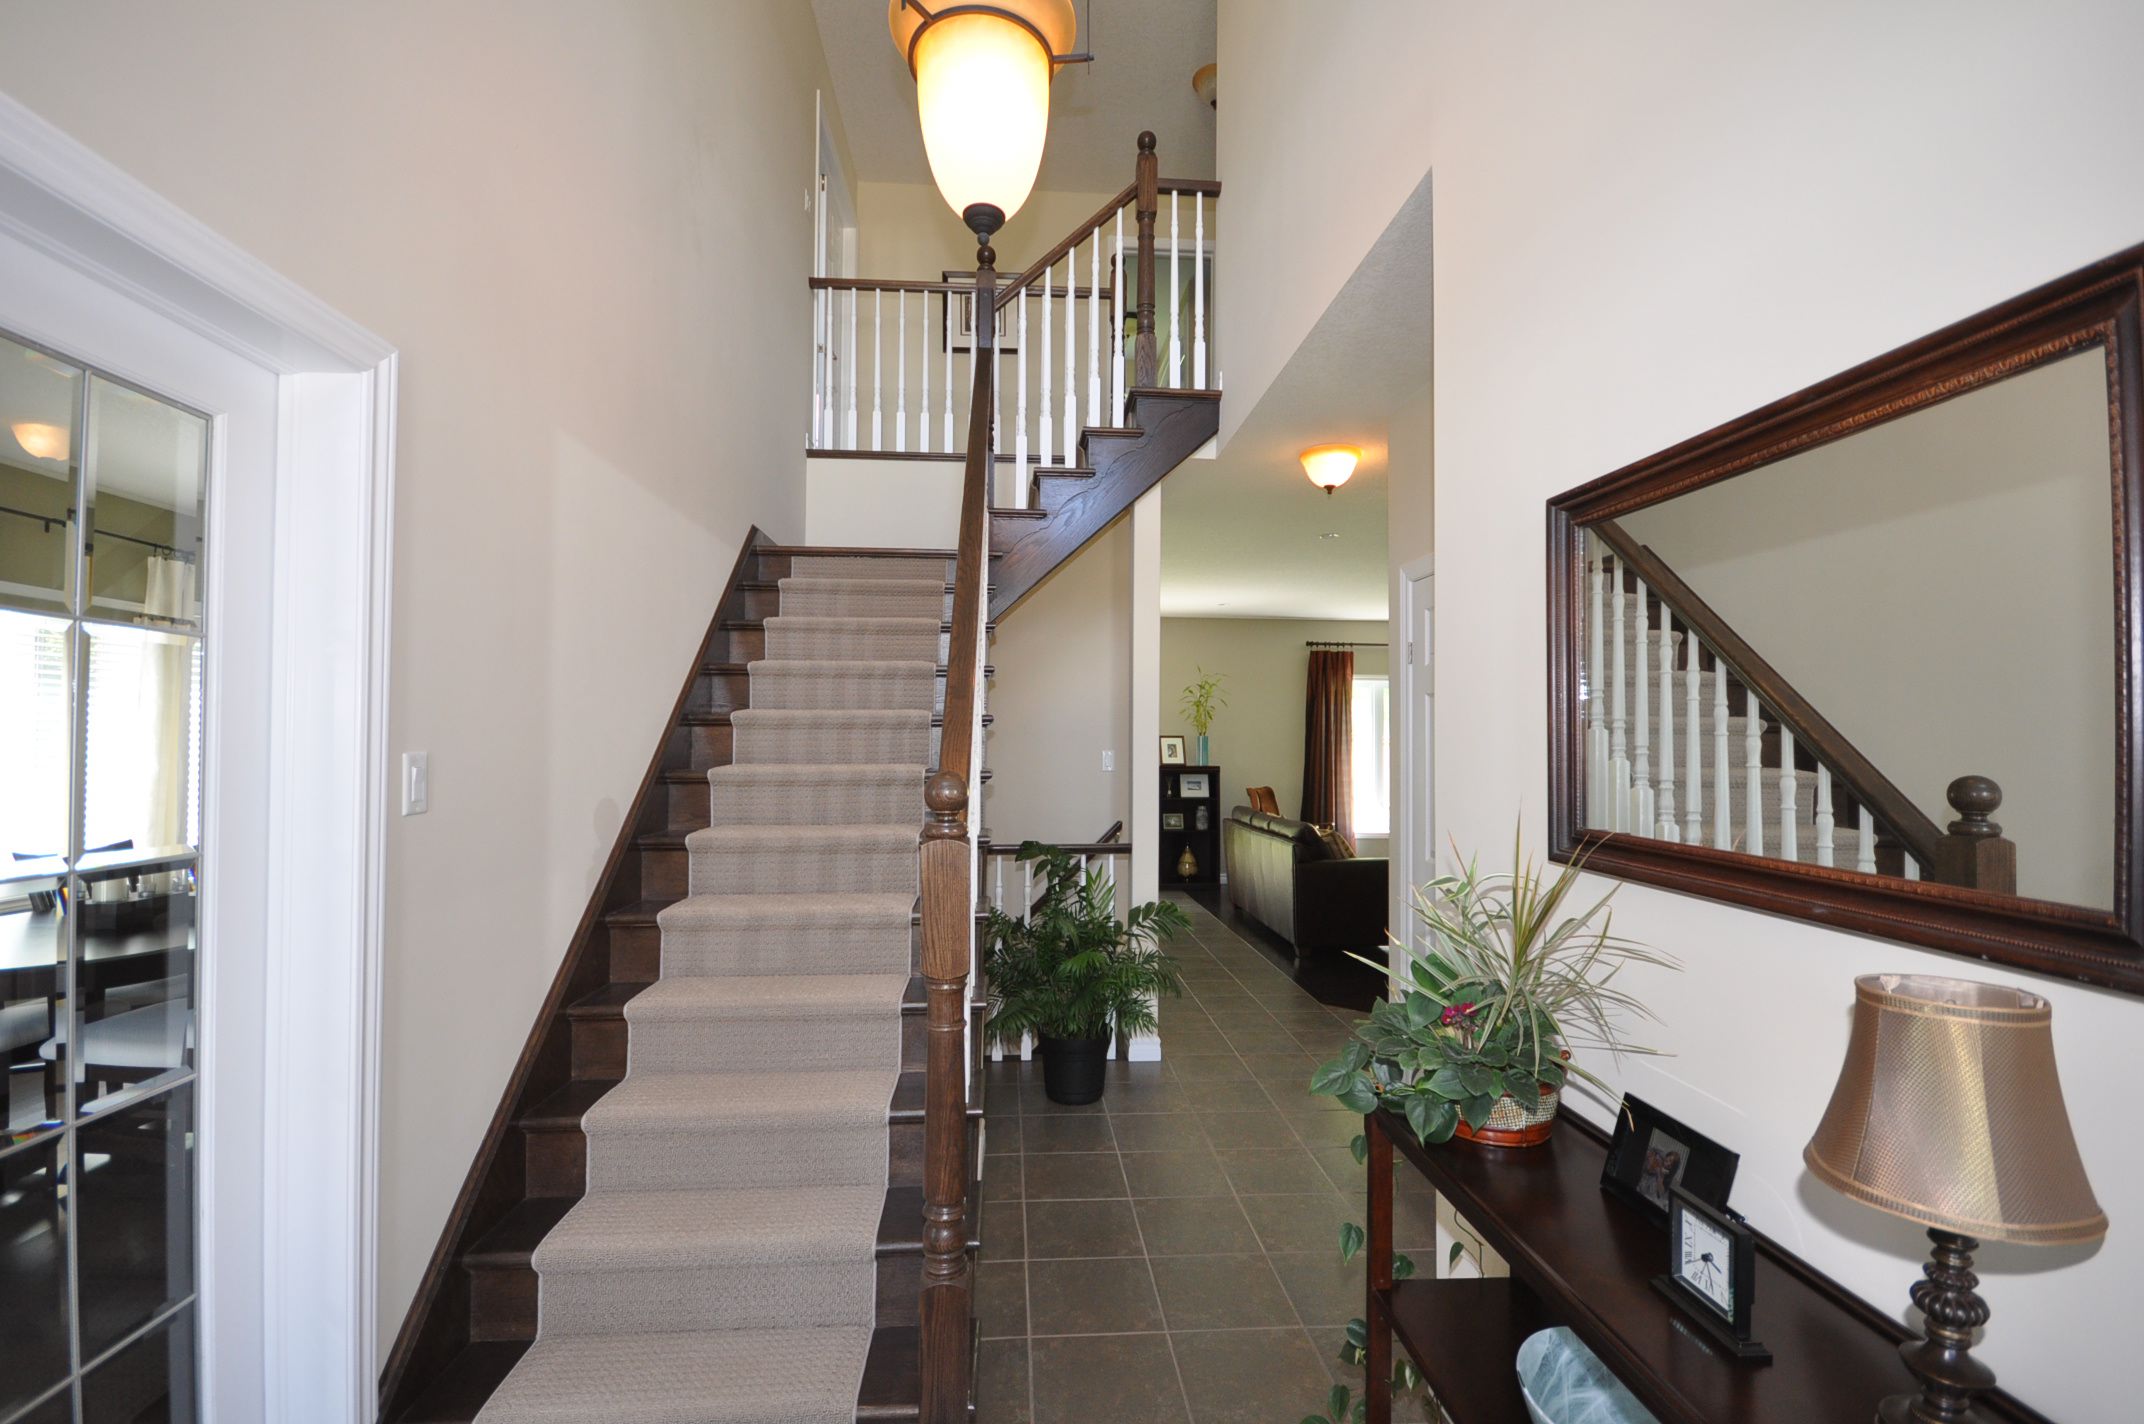 Oak staircase to 2nd floor